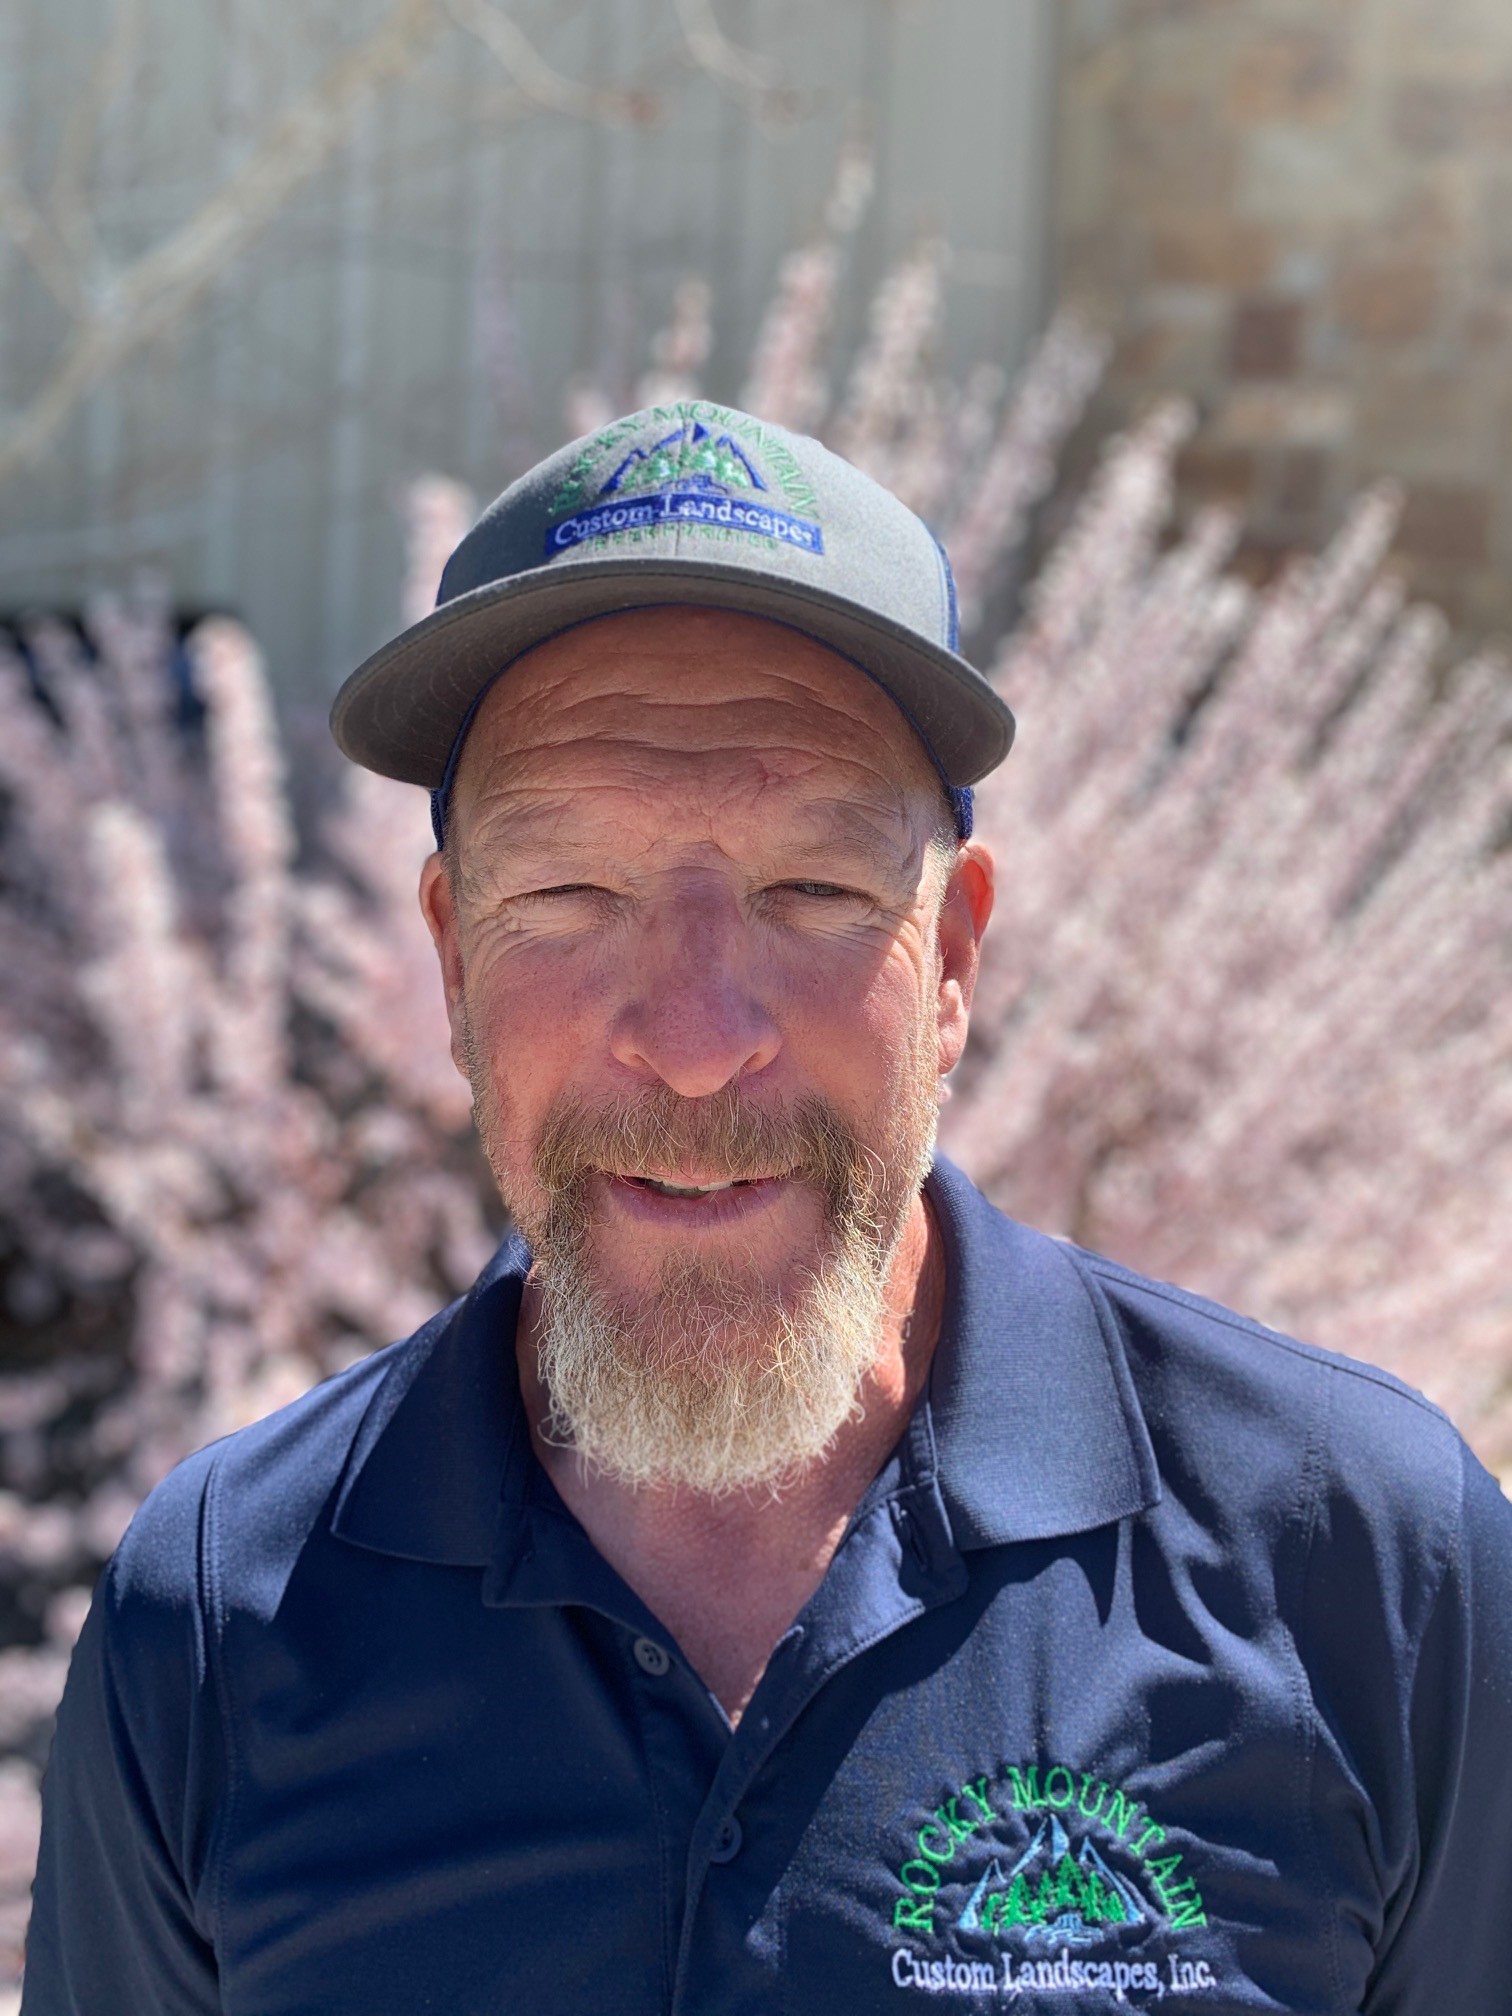 A smiling person wearing a cap and a polo shirt stands before blooming trees, showcasing a sunny day and a professional landscaping business logo.